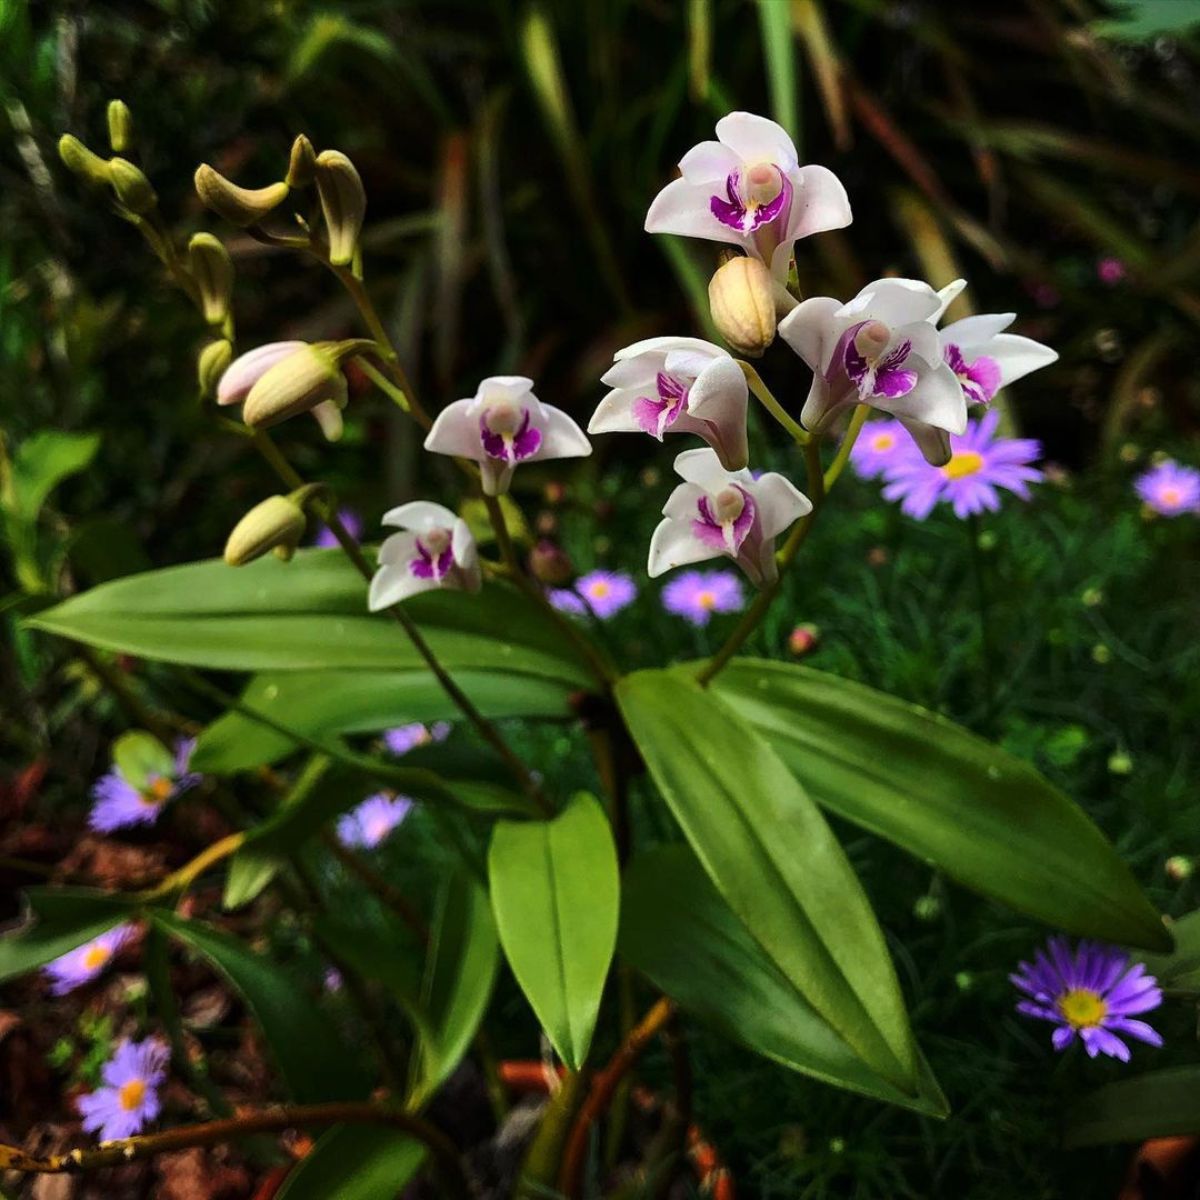 Dendrobium orchids are great for a tropical garden